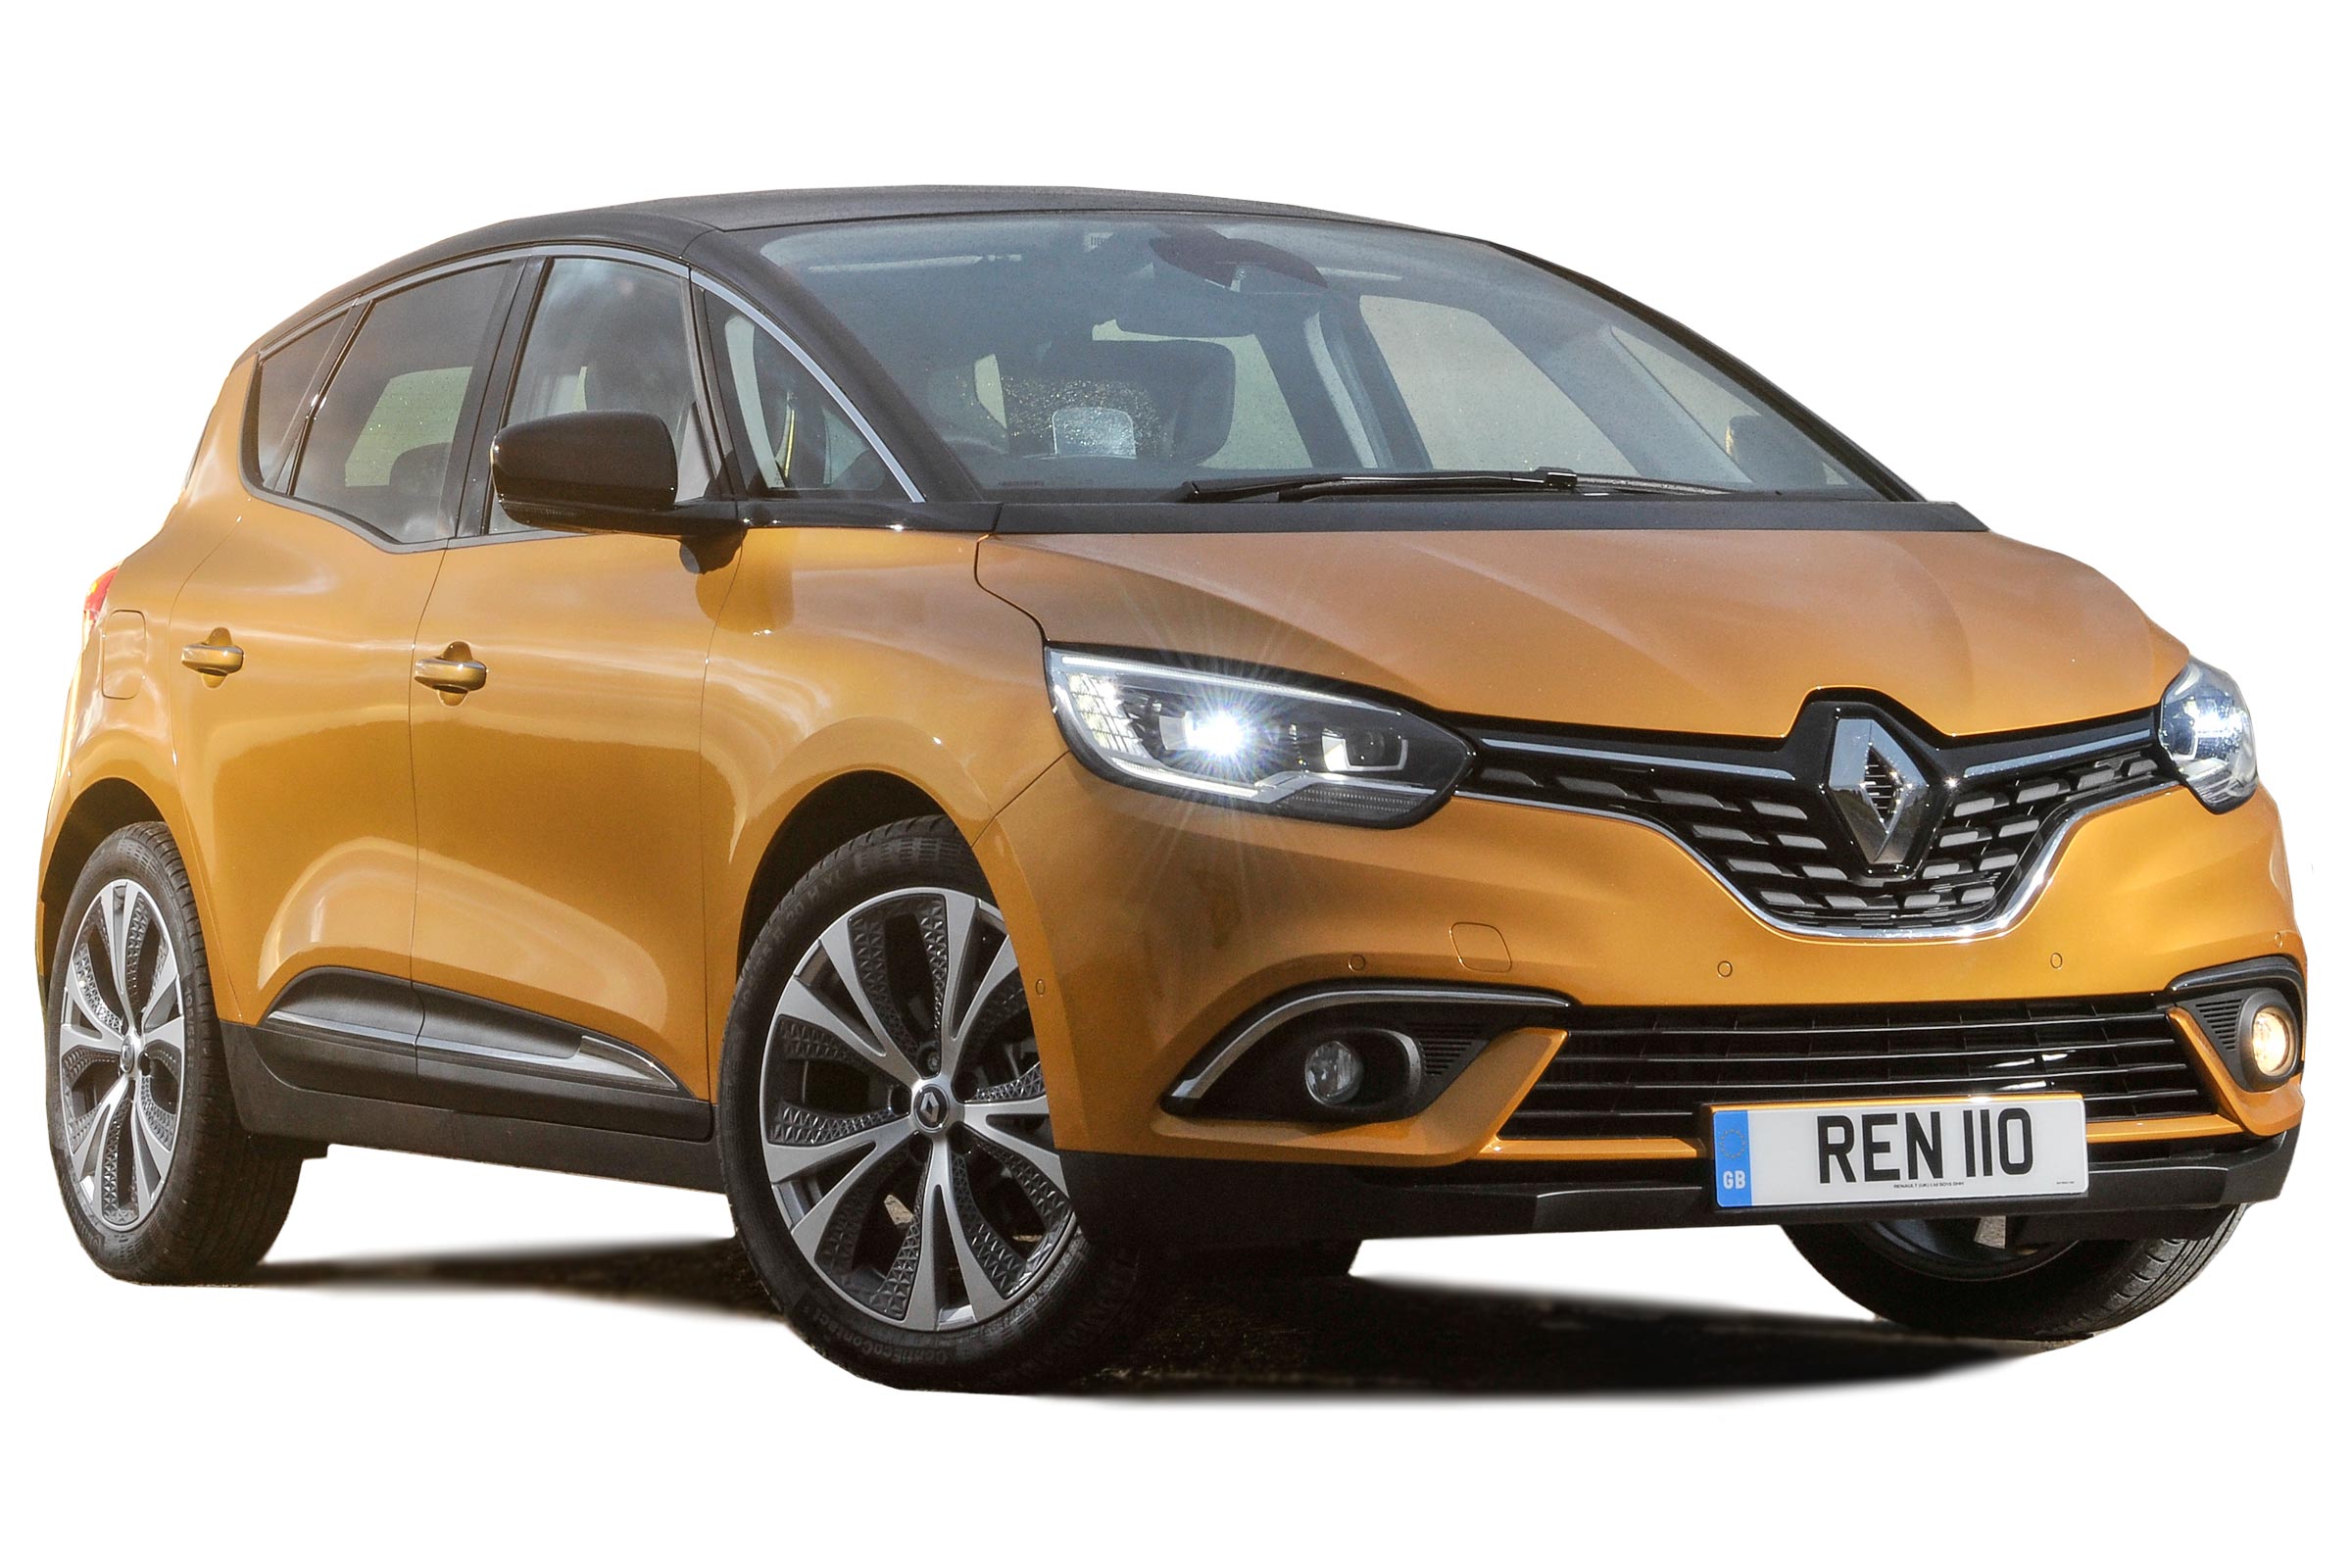 hier Nauwgezet Attent Renault Scenic MPV (2016-2019) | Carbuyer